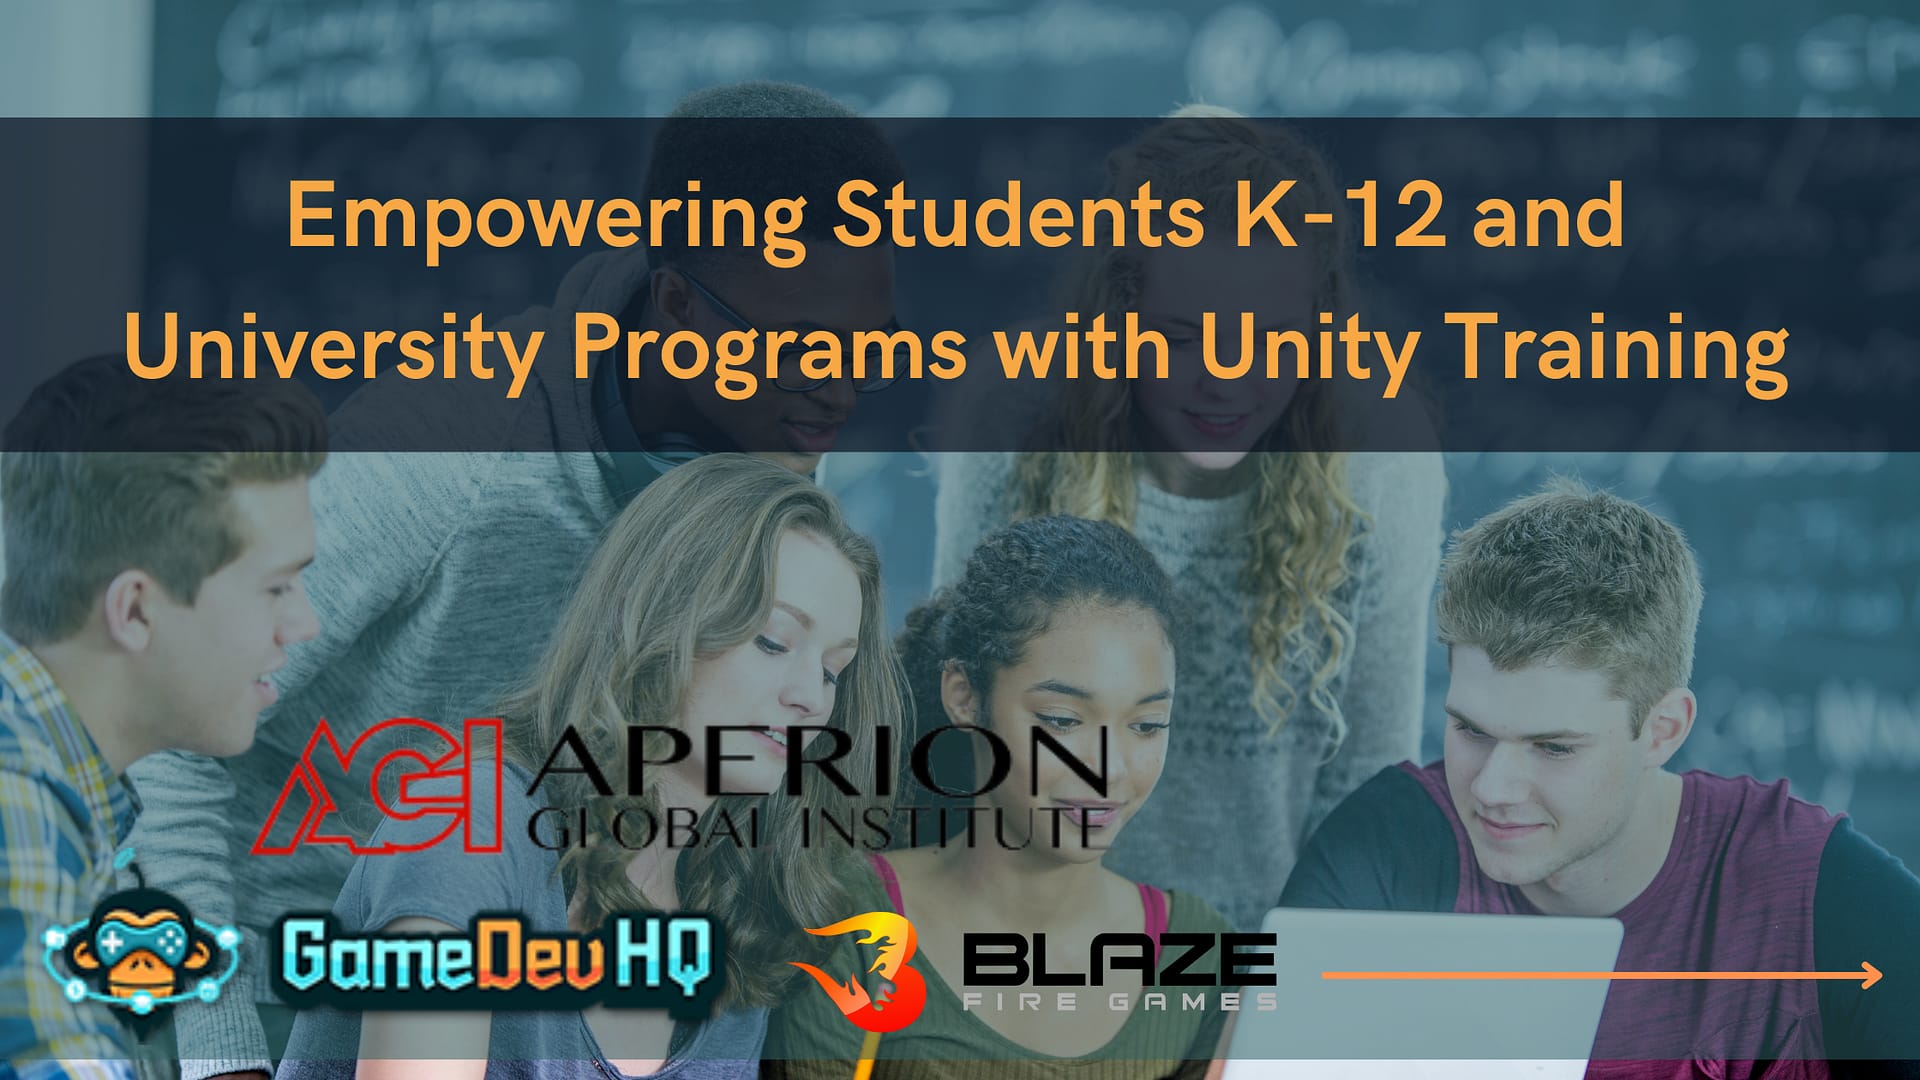 Empowering Students K-12 and University Programs with Unity Training